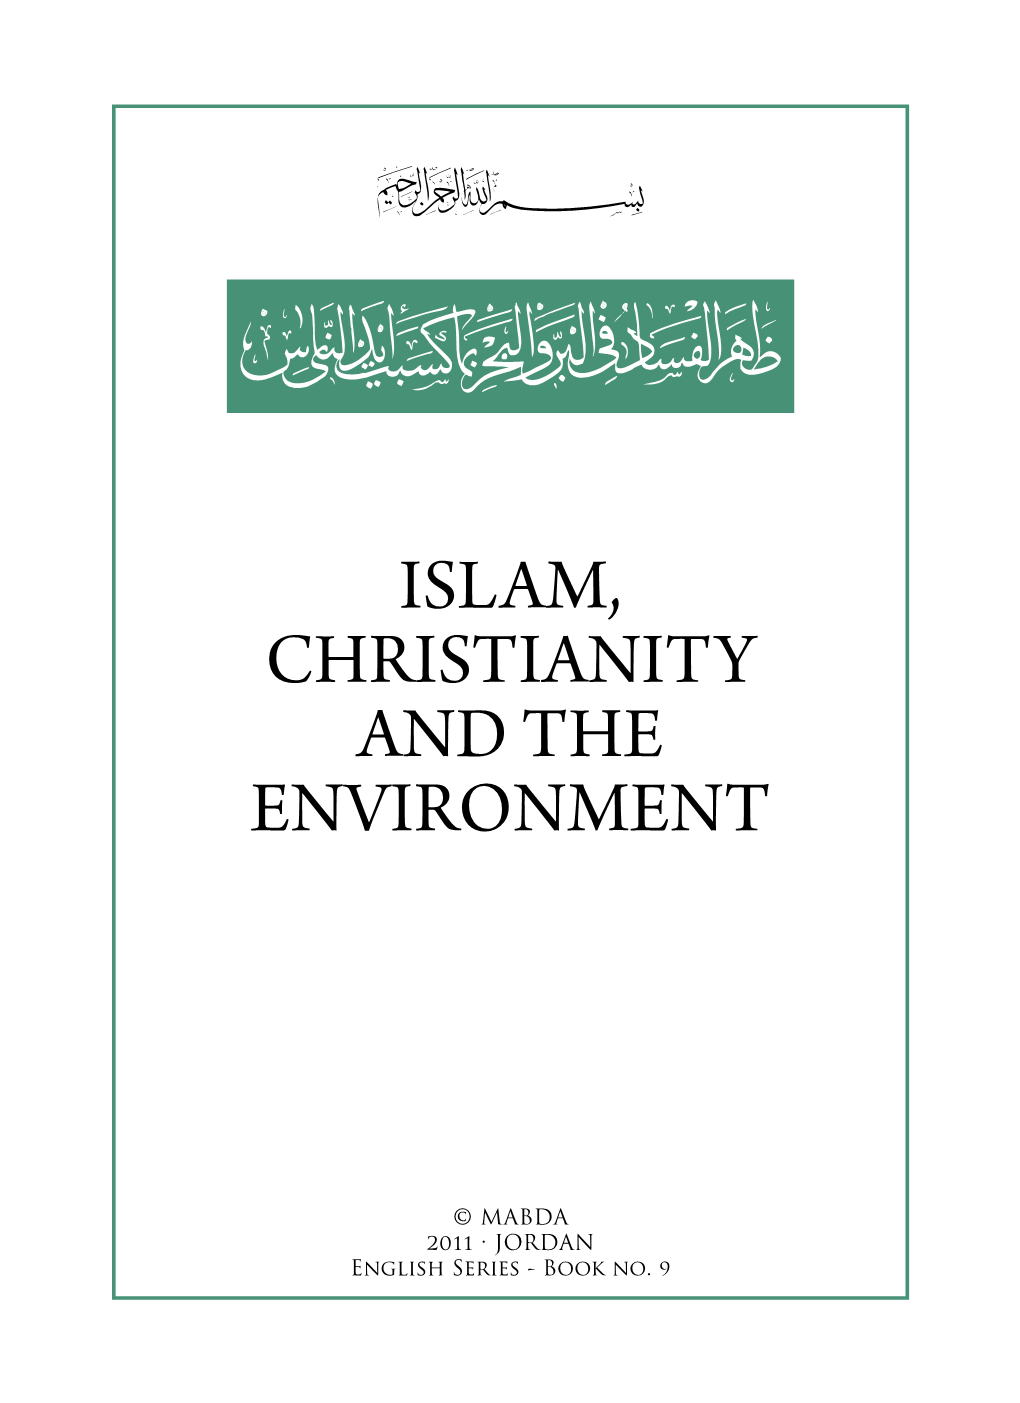 Islam, Christianity and the Environment